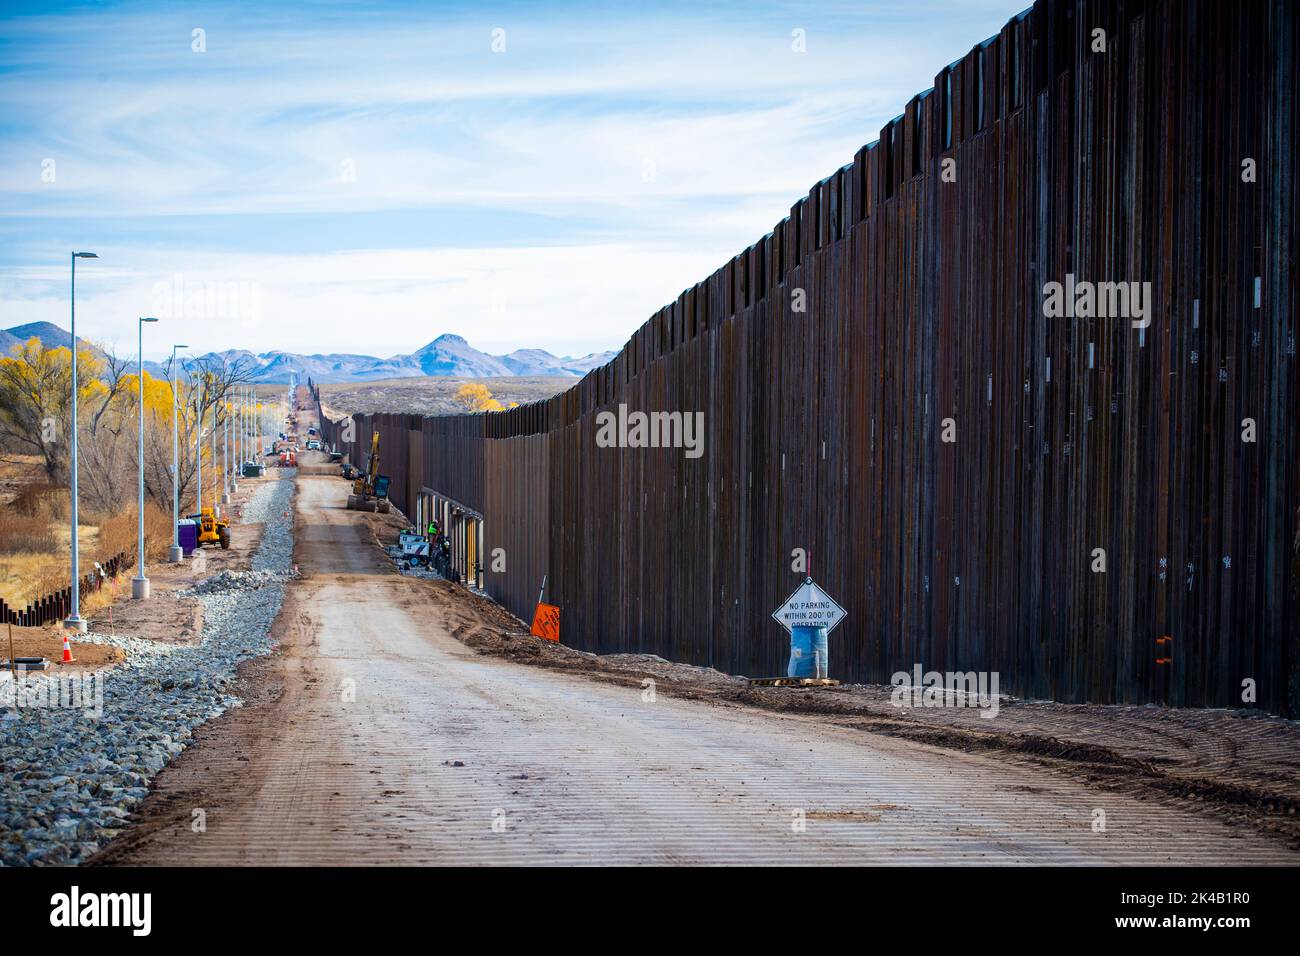 Recently constructed panels at the new border wall system project east of Douglas, Arizona on December 14, 2020. The border wall system includes a combination of infrastructure including new all-weather access roads.  Photo by Jerry Glaser. Stock Photo